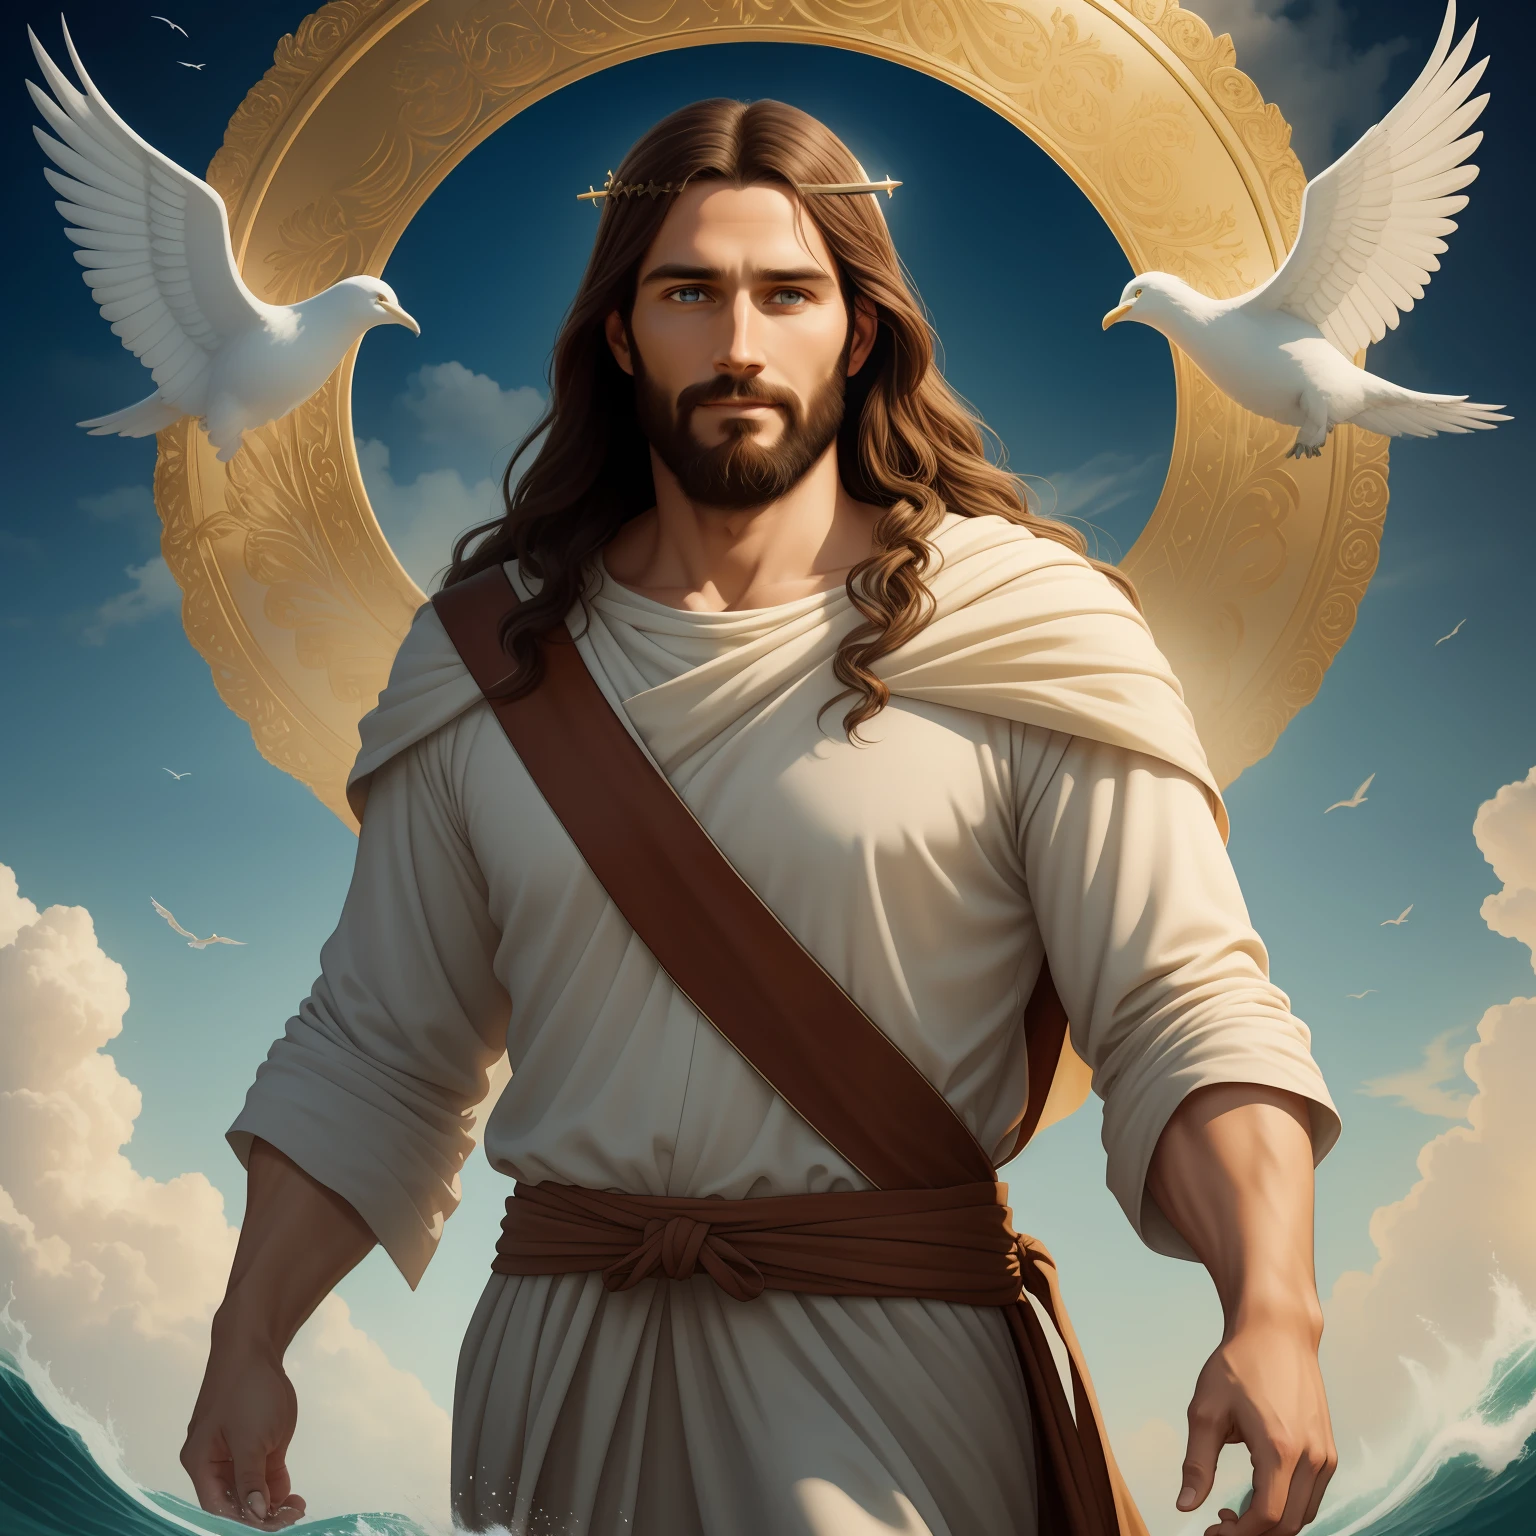 A handsome god Jesus christ ( jesus) blessing to the sky  35 years old with a long brown hair and long beard, heaven blessings light with a cross background)  happy face, realistic 8k,A beautiful ultra-thin realistic portrait of Jesus, the prophet, a man 35 years old Hebrew brunette, short brown hair, real perfect eyes, long brown beard, with, Helping People , wearing long linen tunic closed on the chest part, in front view, full body, biblical, realistic,by Diego Velázquez,Peter Paul Rubens,Rembrandt,Alex Ross,8k, Concept Art, PhotoRealistic, Realistic,  Illustration, Oil Painting, Surrealism, HyperRealistic, helping people , Digital art, style, watercolorReal Jesus flying on sky with a flying cloud in the background, Jesus walking on water, biblical illustration, epic biblical representation, forcing him to flee, coming out of the ocean, ! holding in hand!, disembarking, god of the ocean, beautiful representation, 8k 3D Model, realistic,
a 3D Realistic of jesus with a halo in the sky, jesus christ, smiling in heaven, portrait of jesus christ, jesus face, 35 young almighty god, portrait of a heavenly god, greg olsen, gigachad jesus, jesus of nazareth, jesus, the face of god, god looking at me, he is greeting you warmly, he is happy, avatar image